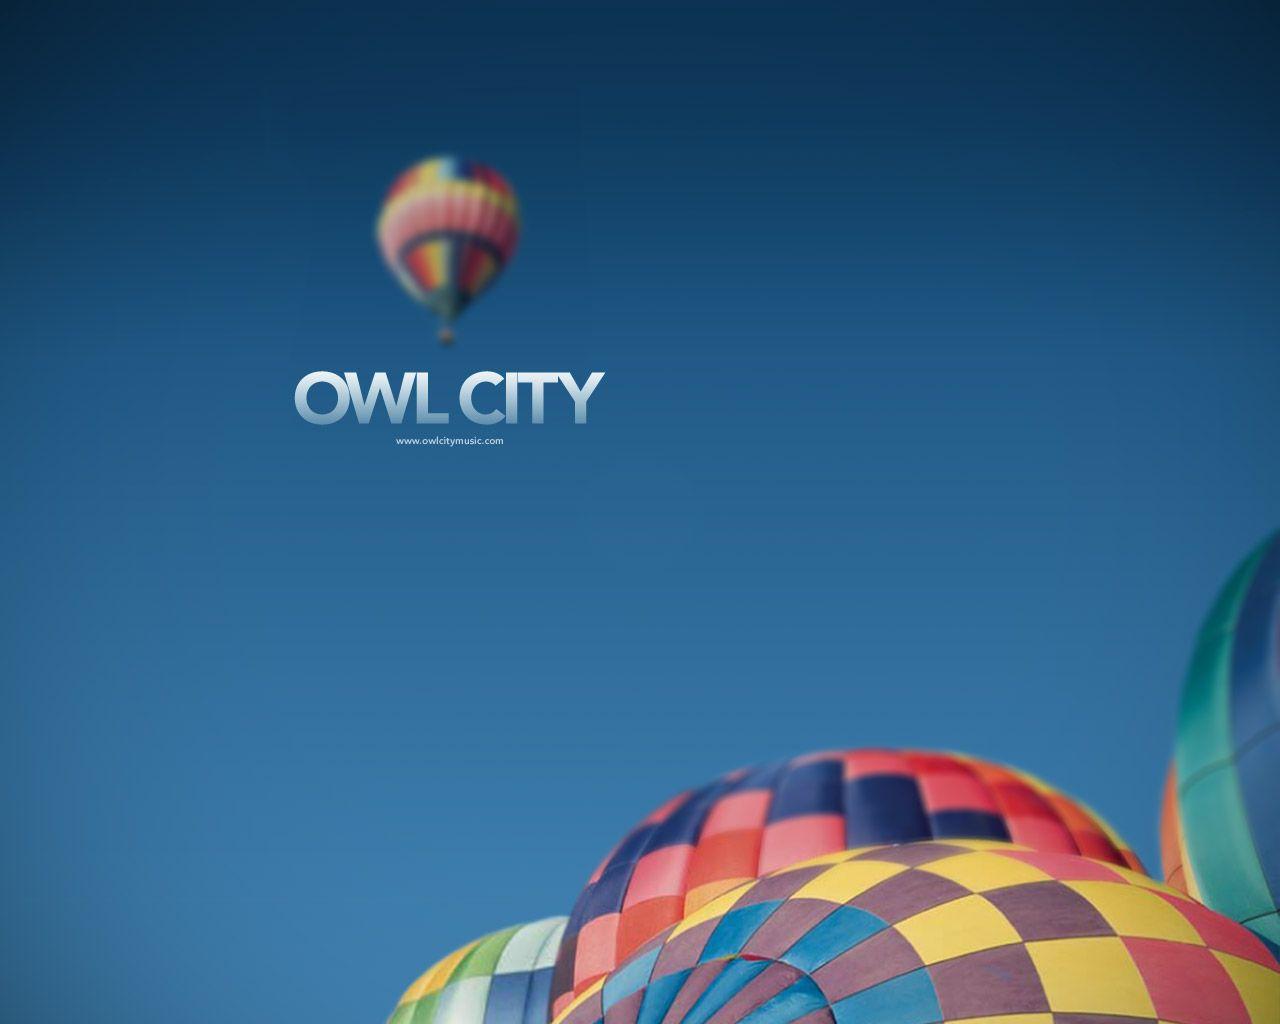 Owl City Wallpaper (Picture)